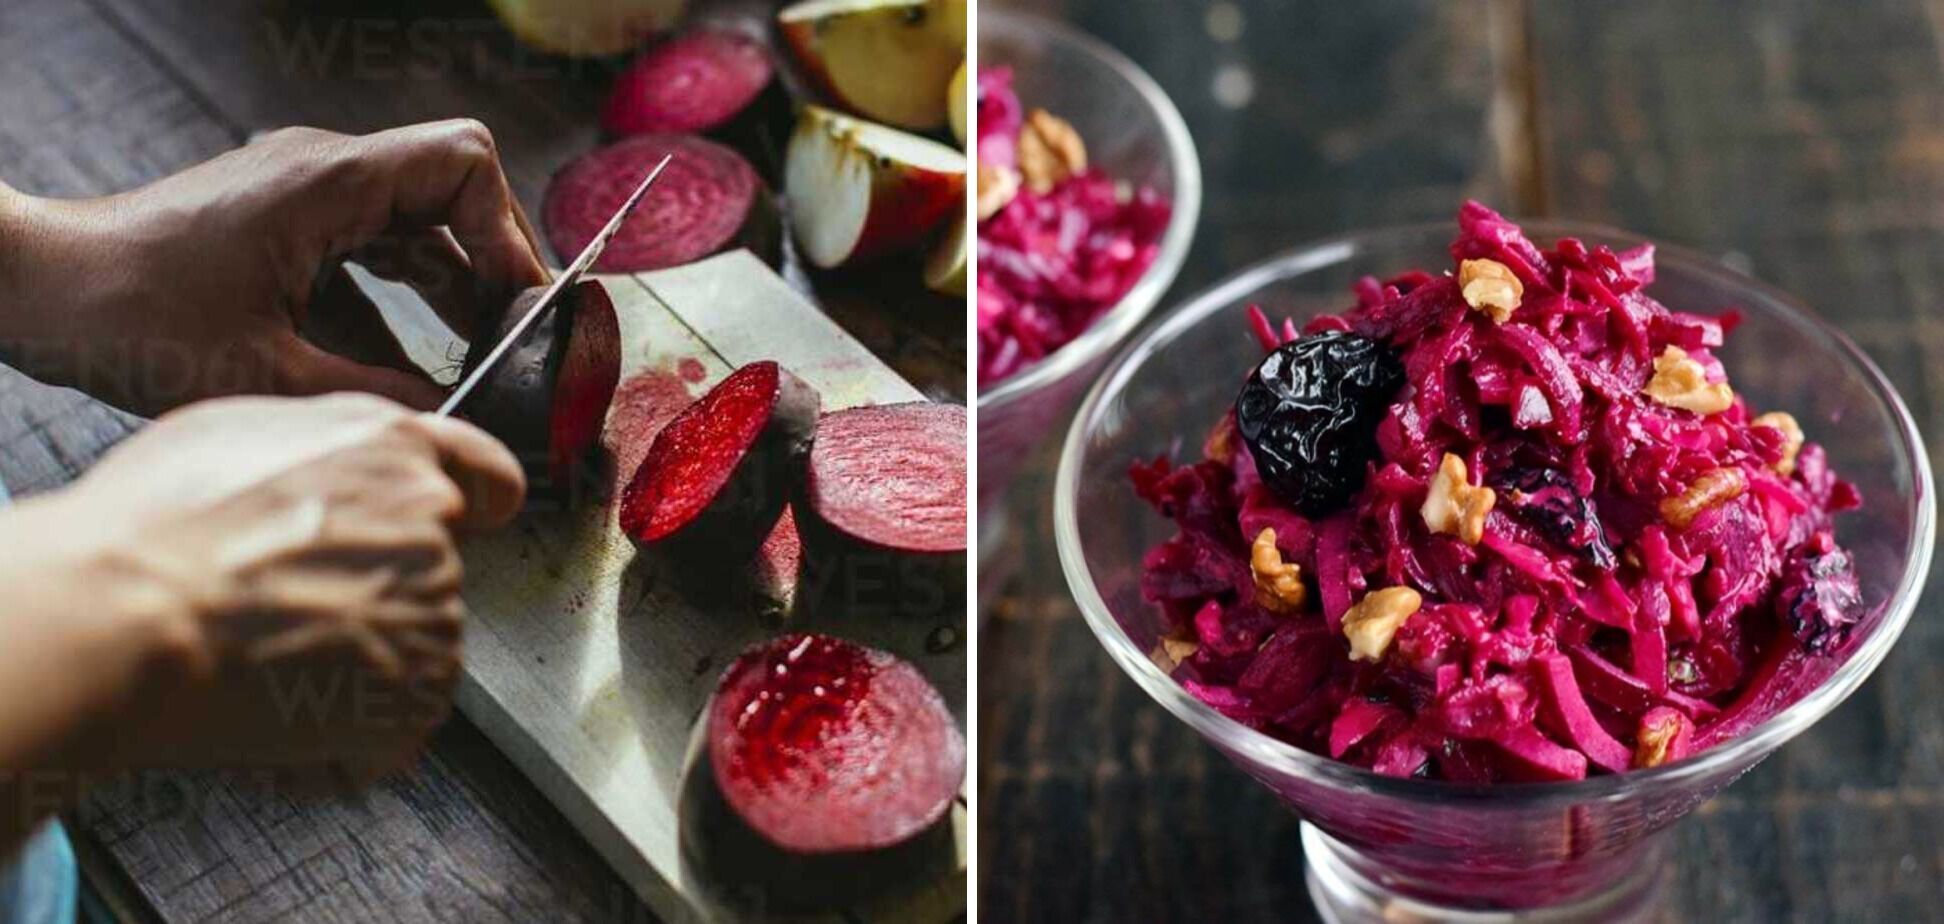 What vitamin salad can be made from beets